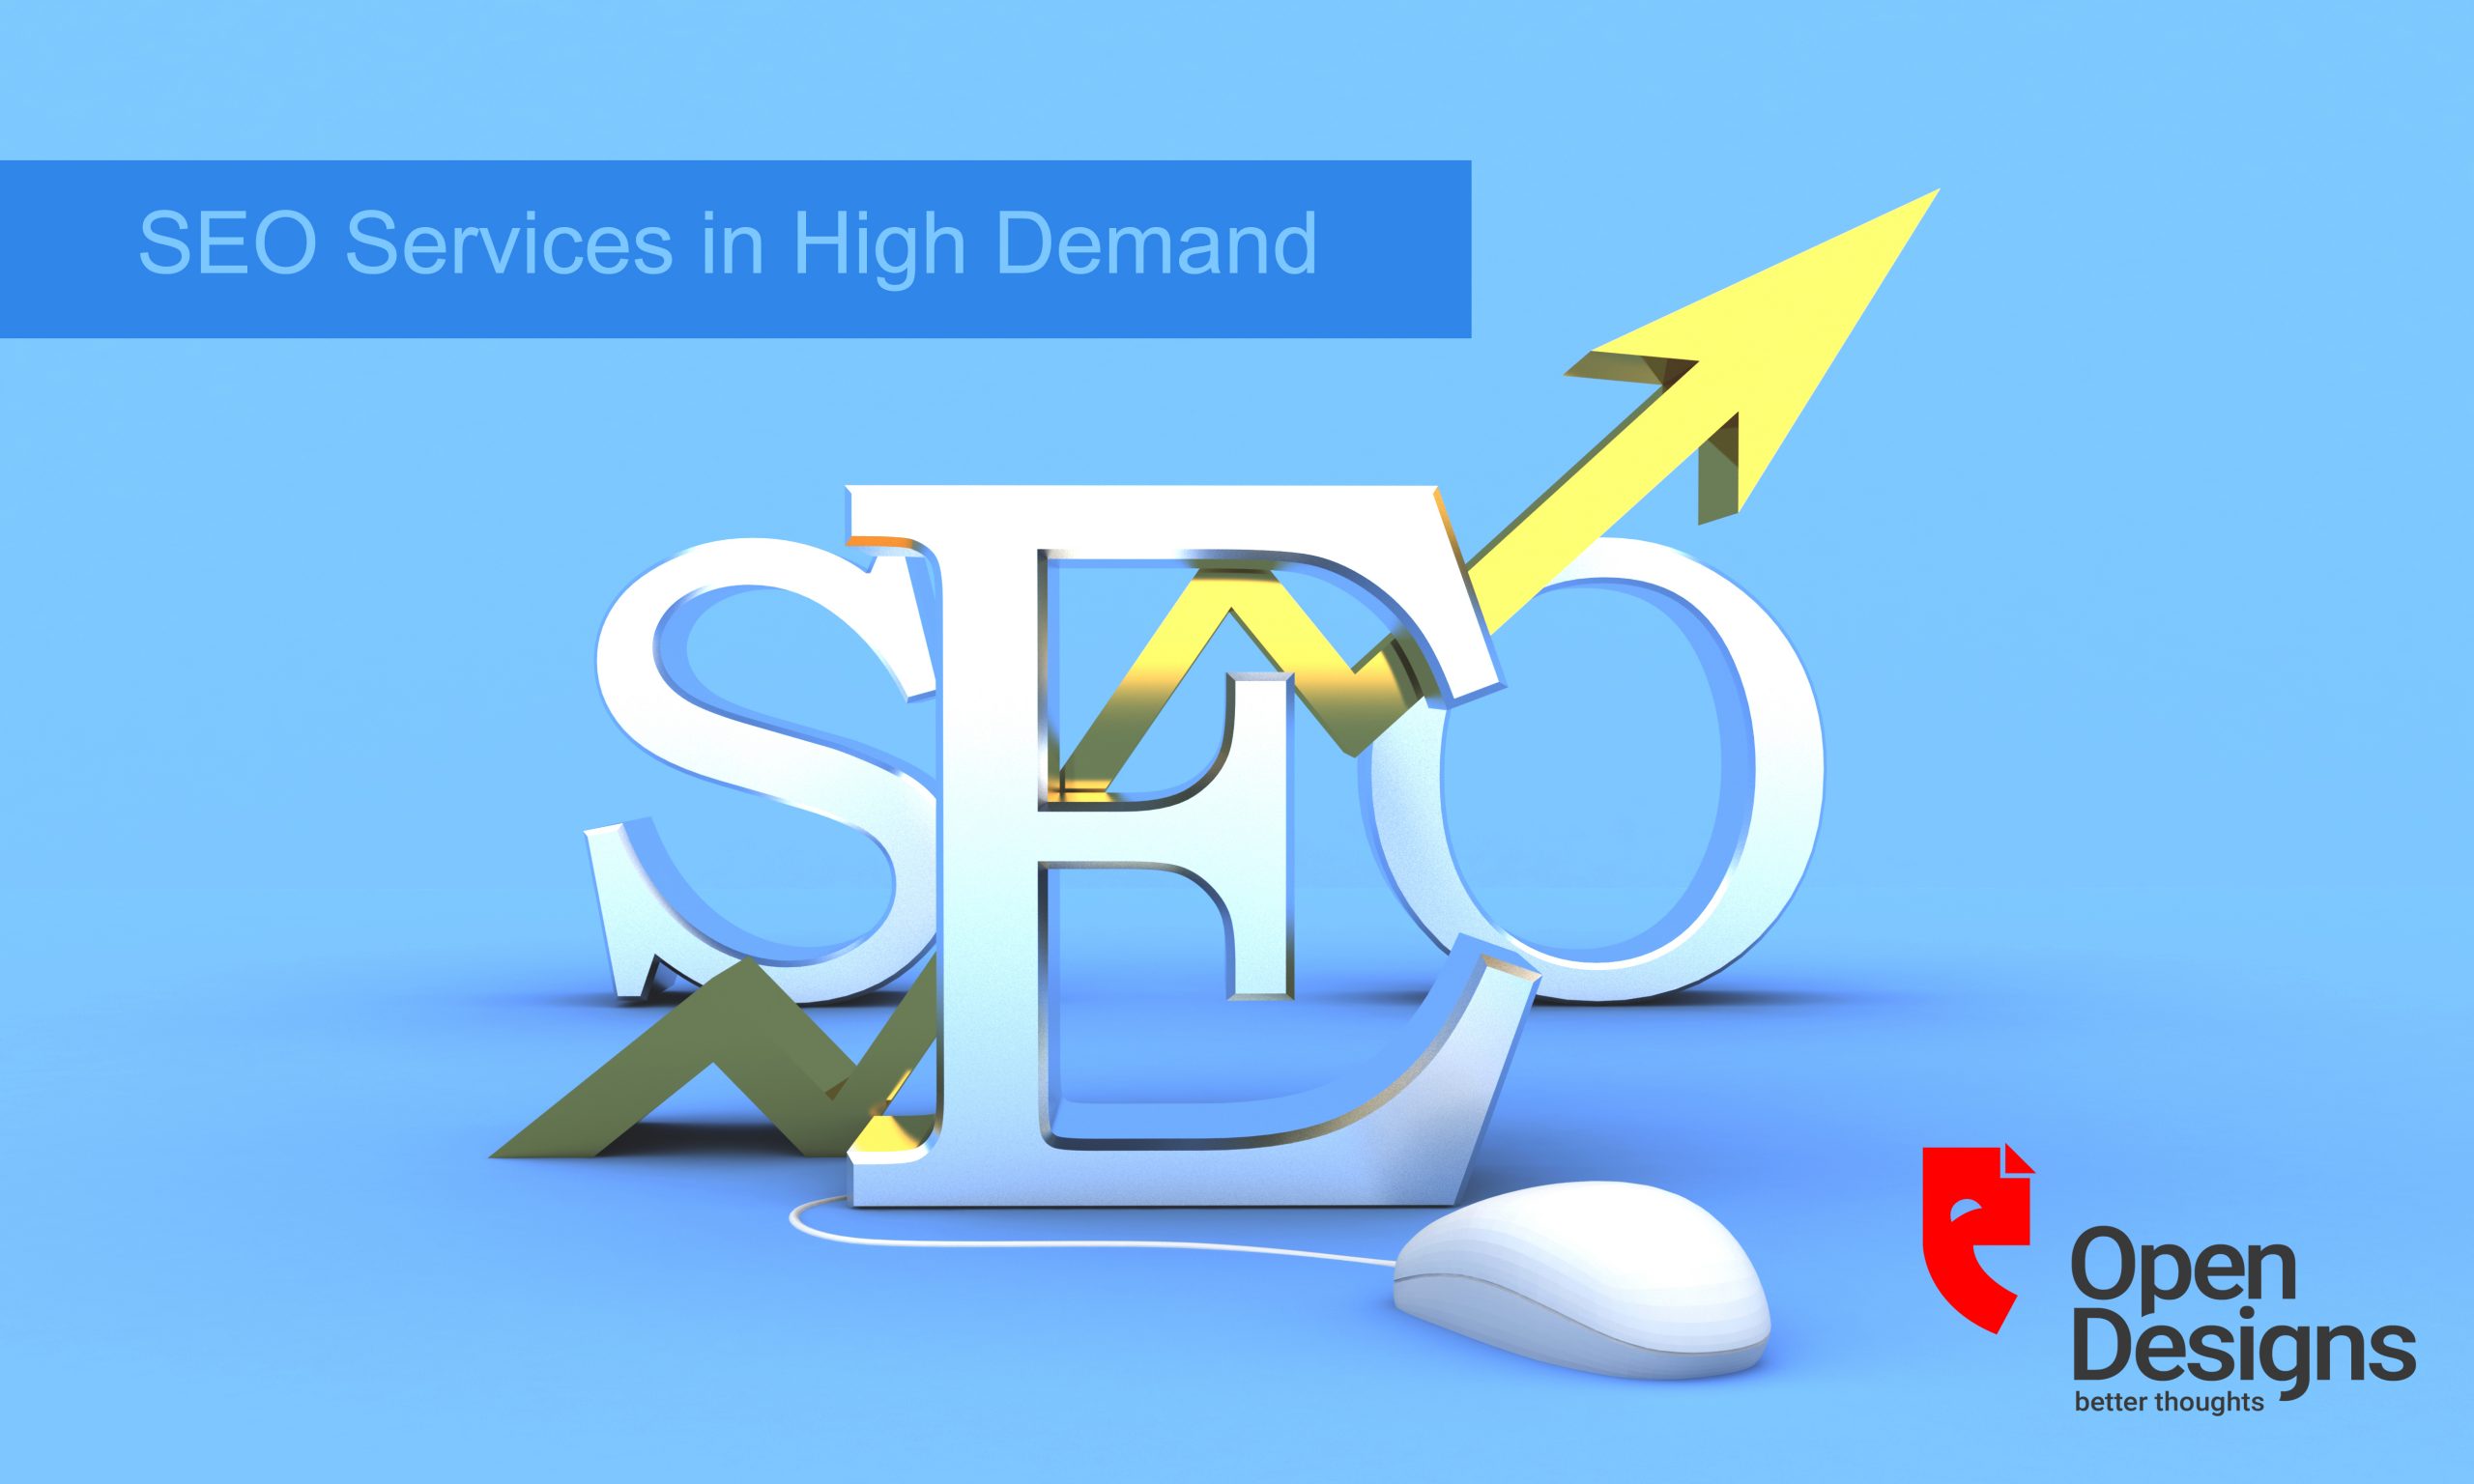 SEO Services in High Demand